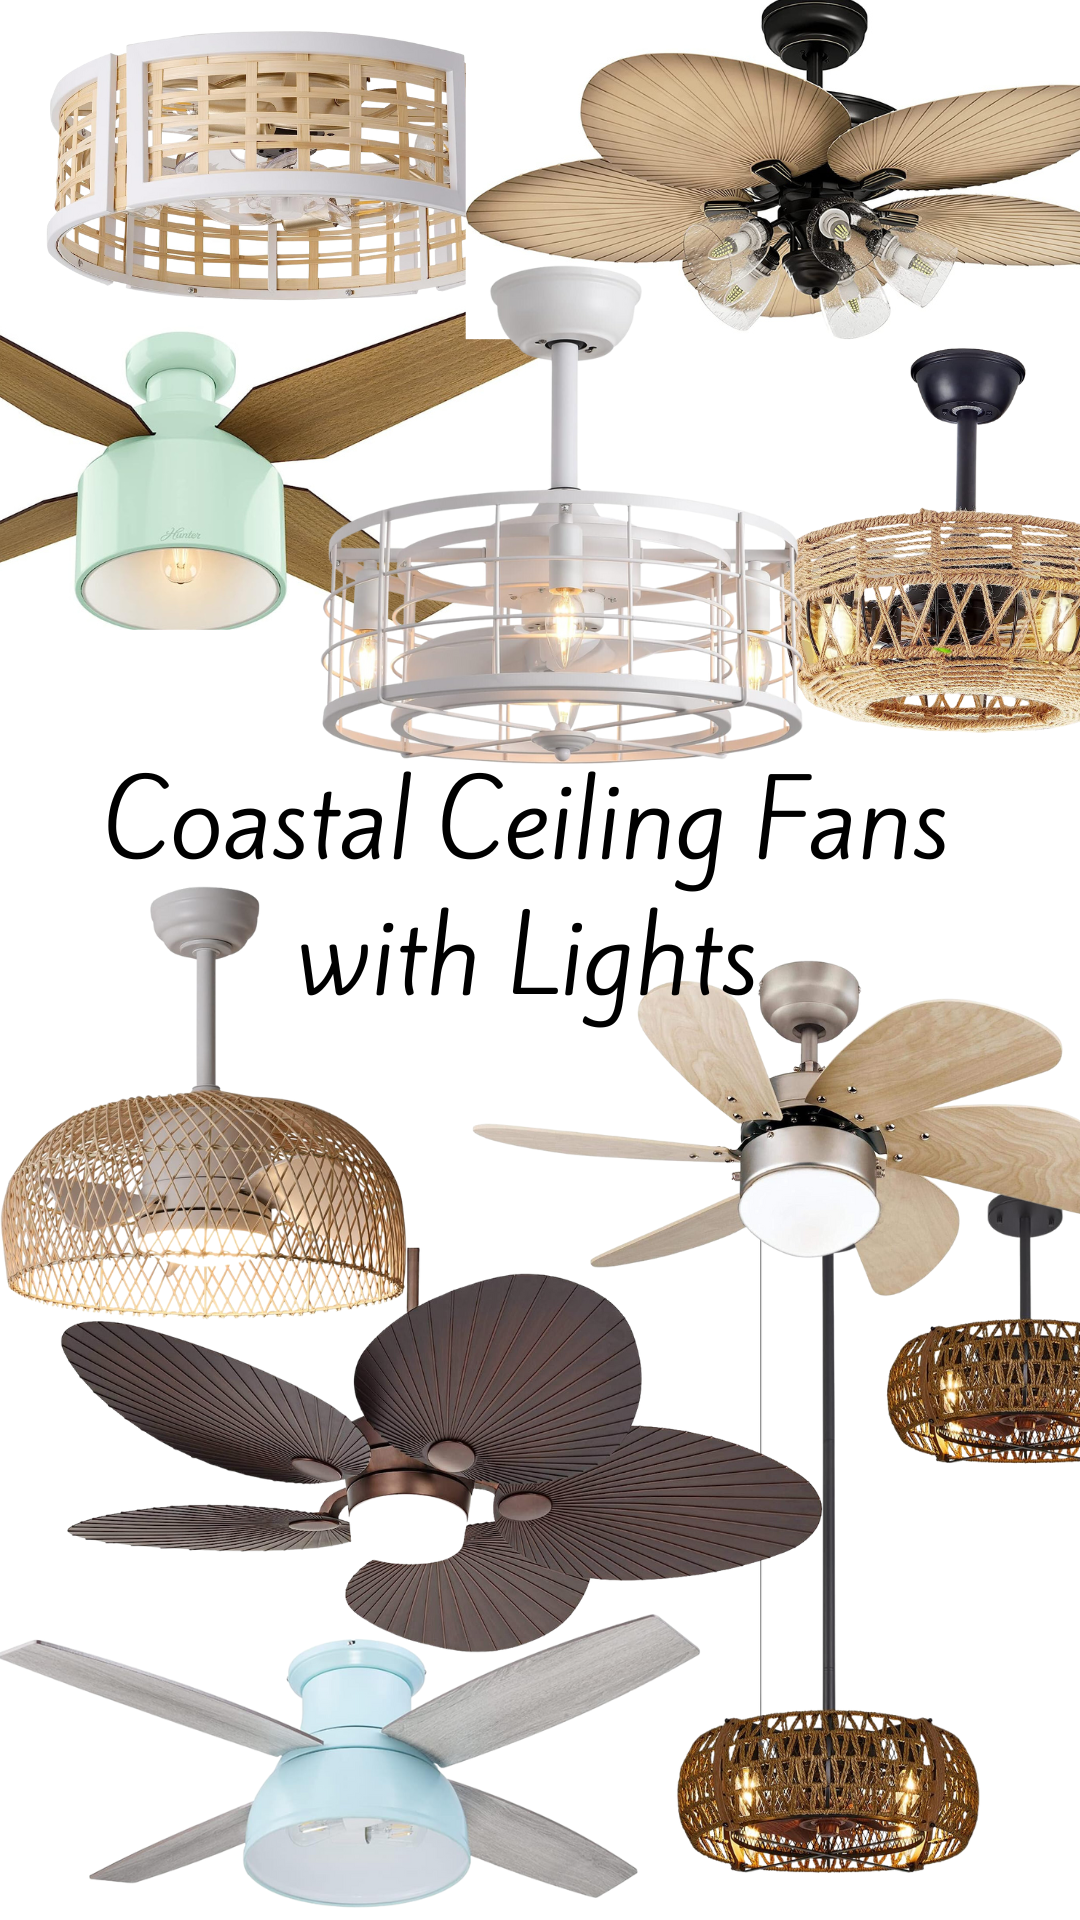 10 Coastal Ceiling Fans With Lights